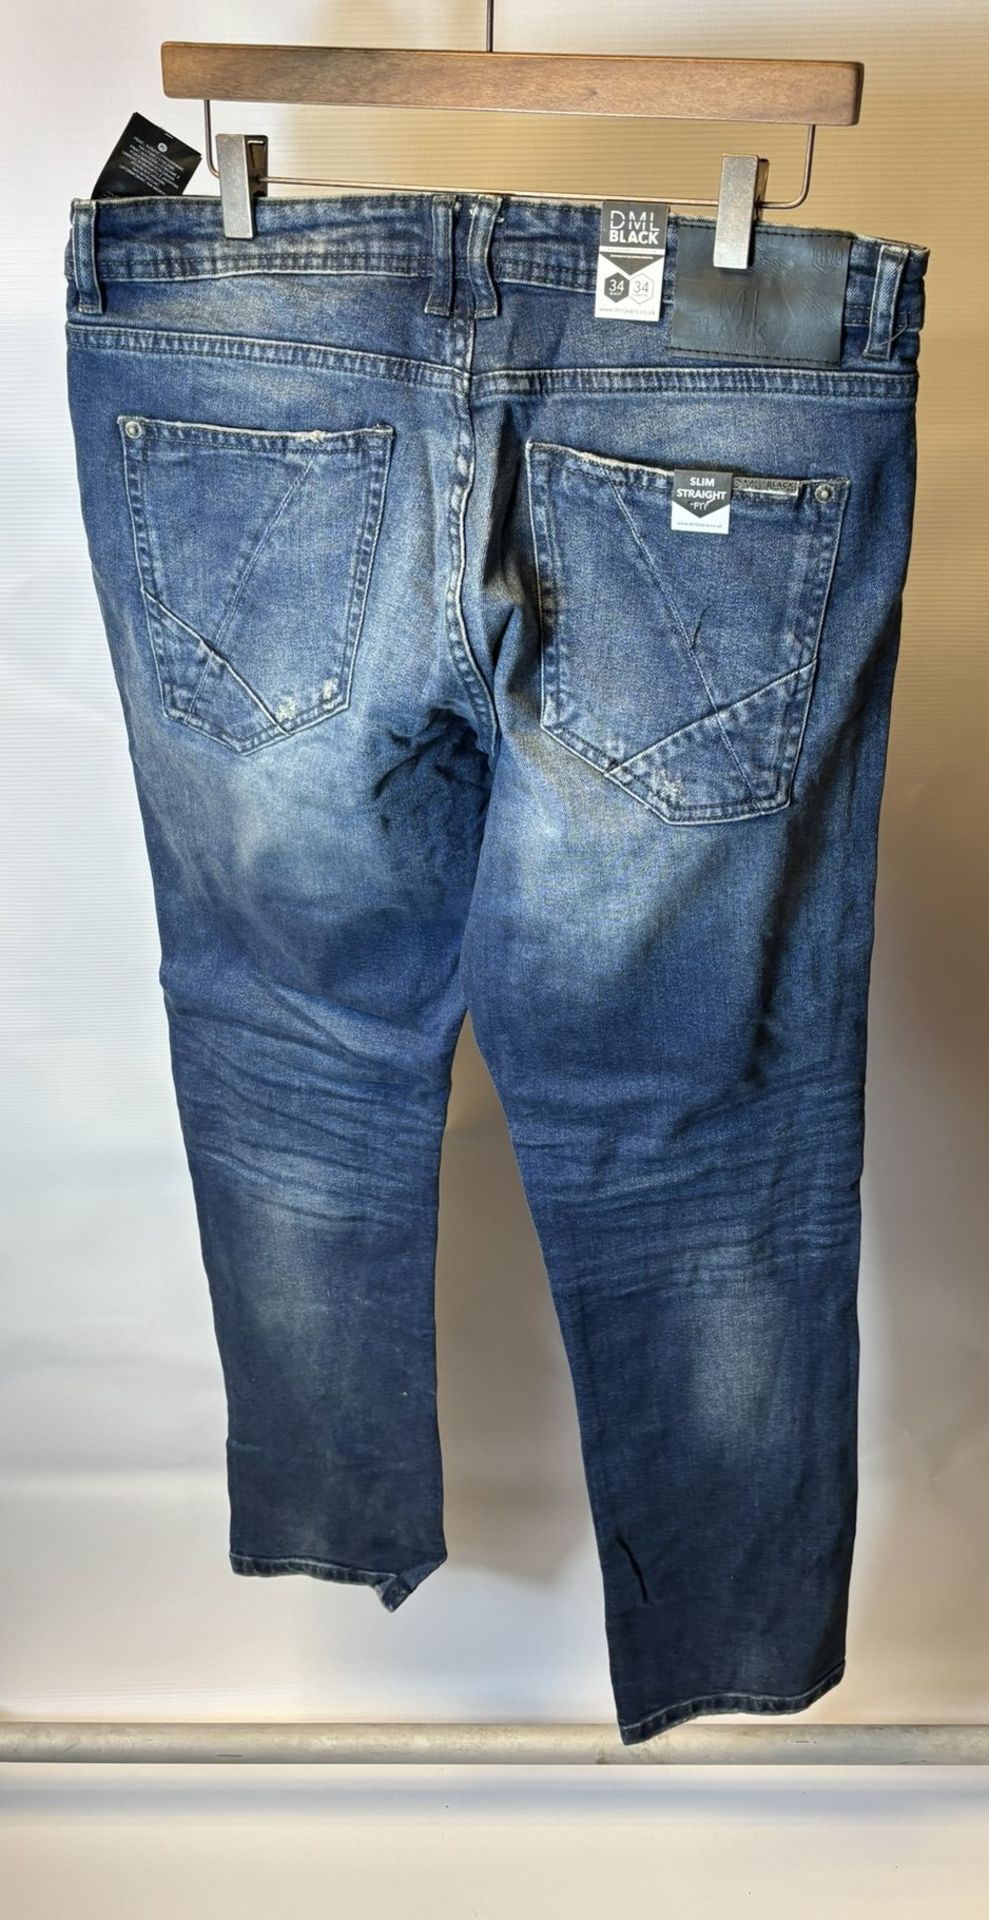 13 x Pairs Of various Sized DML Jeans Prophecy & Voyage Blue Jeans - Image 8 of 39